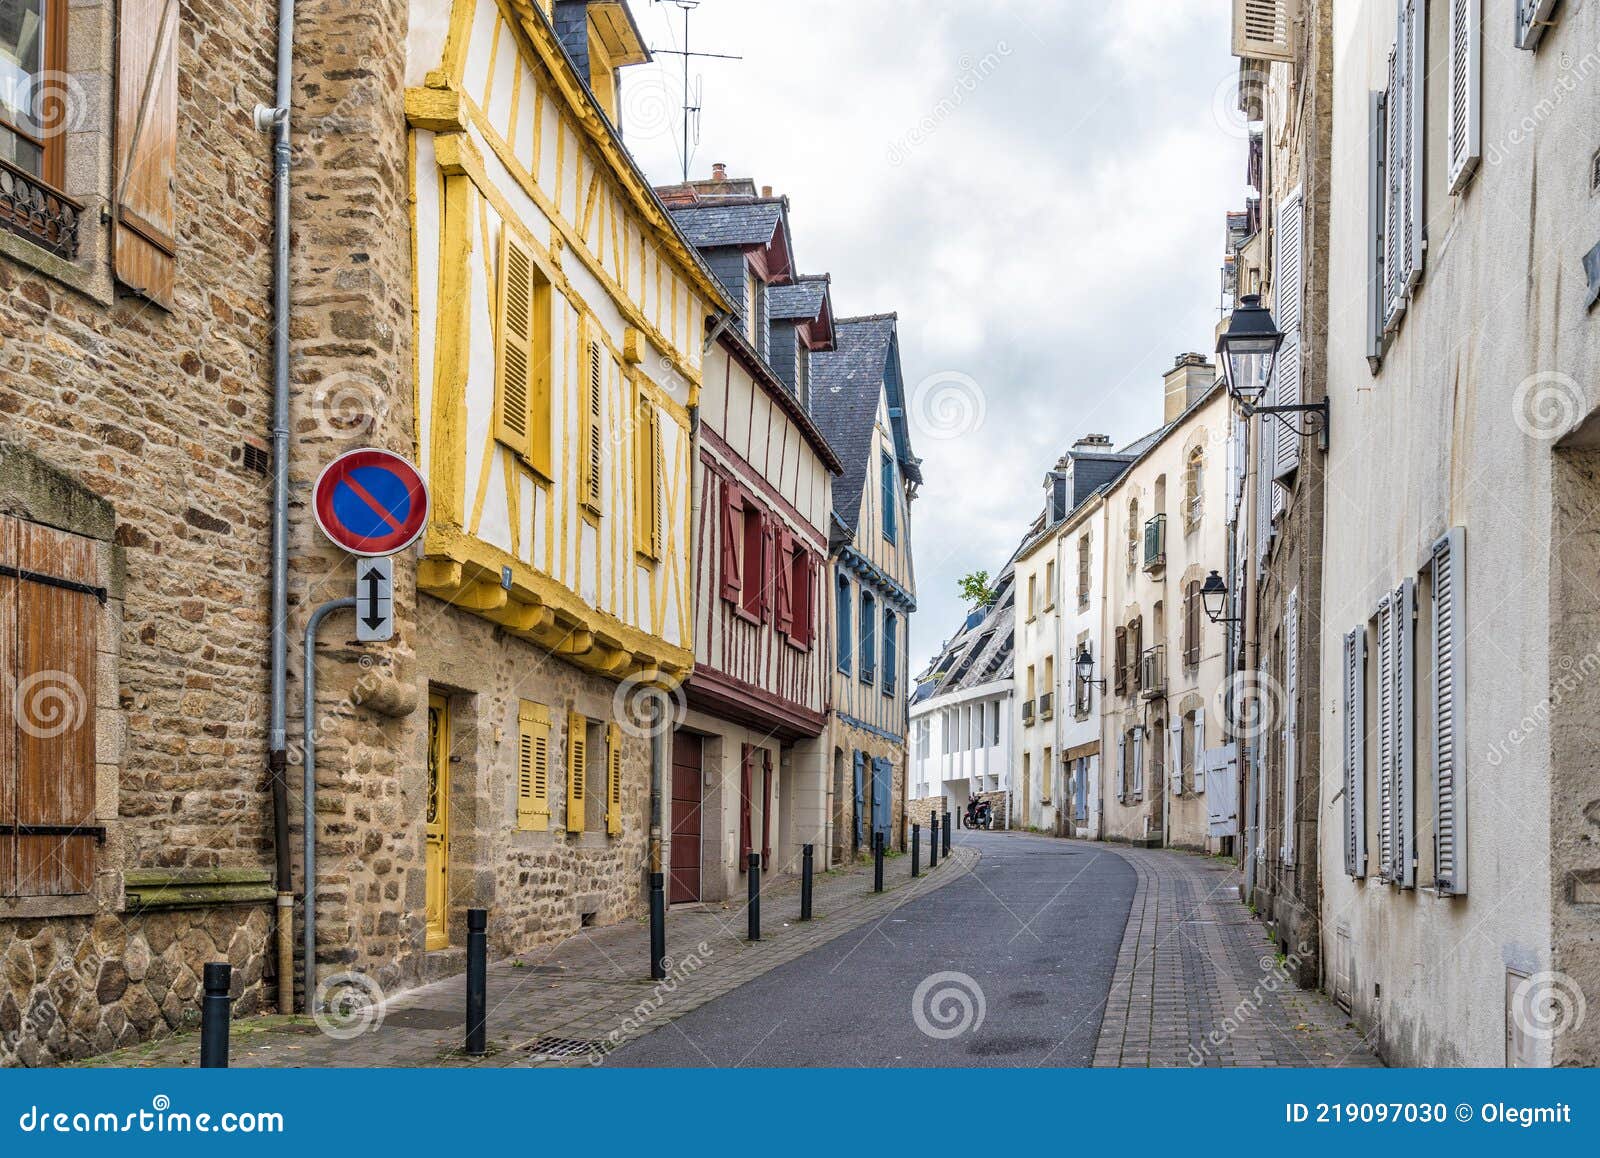 1 379 Vannes France Photos Free Royalty Free Stock Photos From Dreamstime